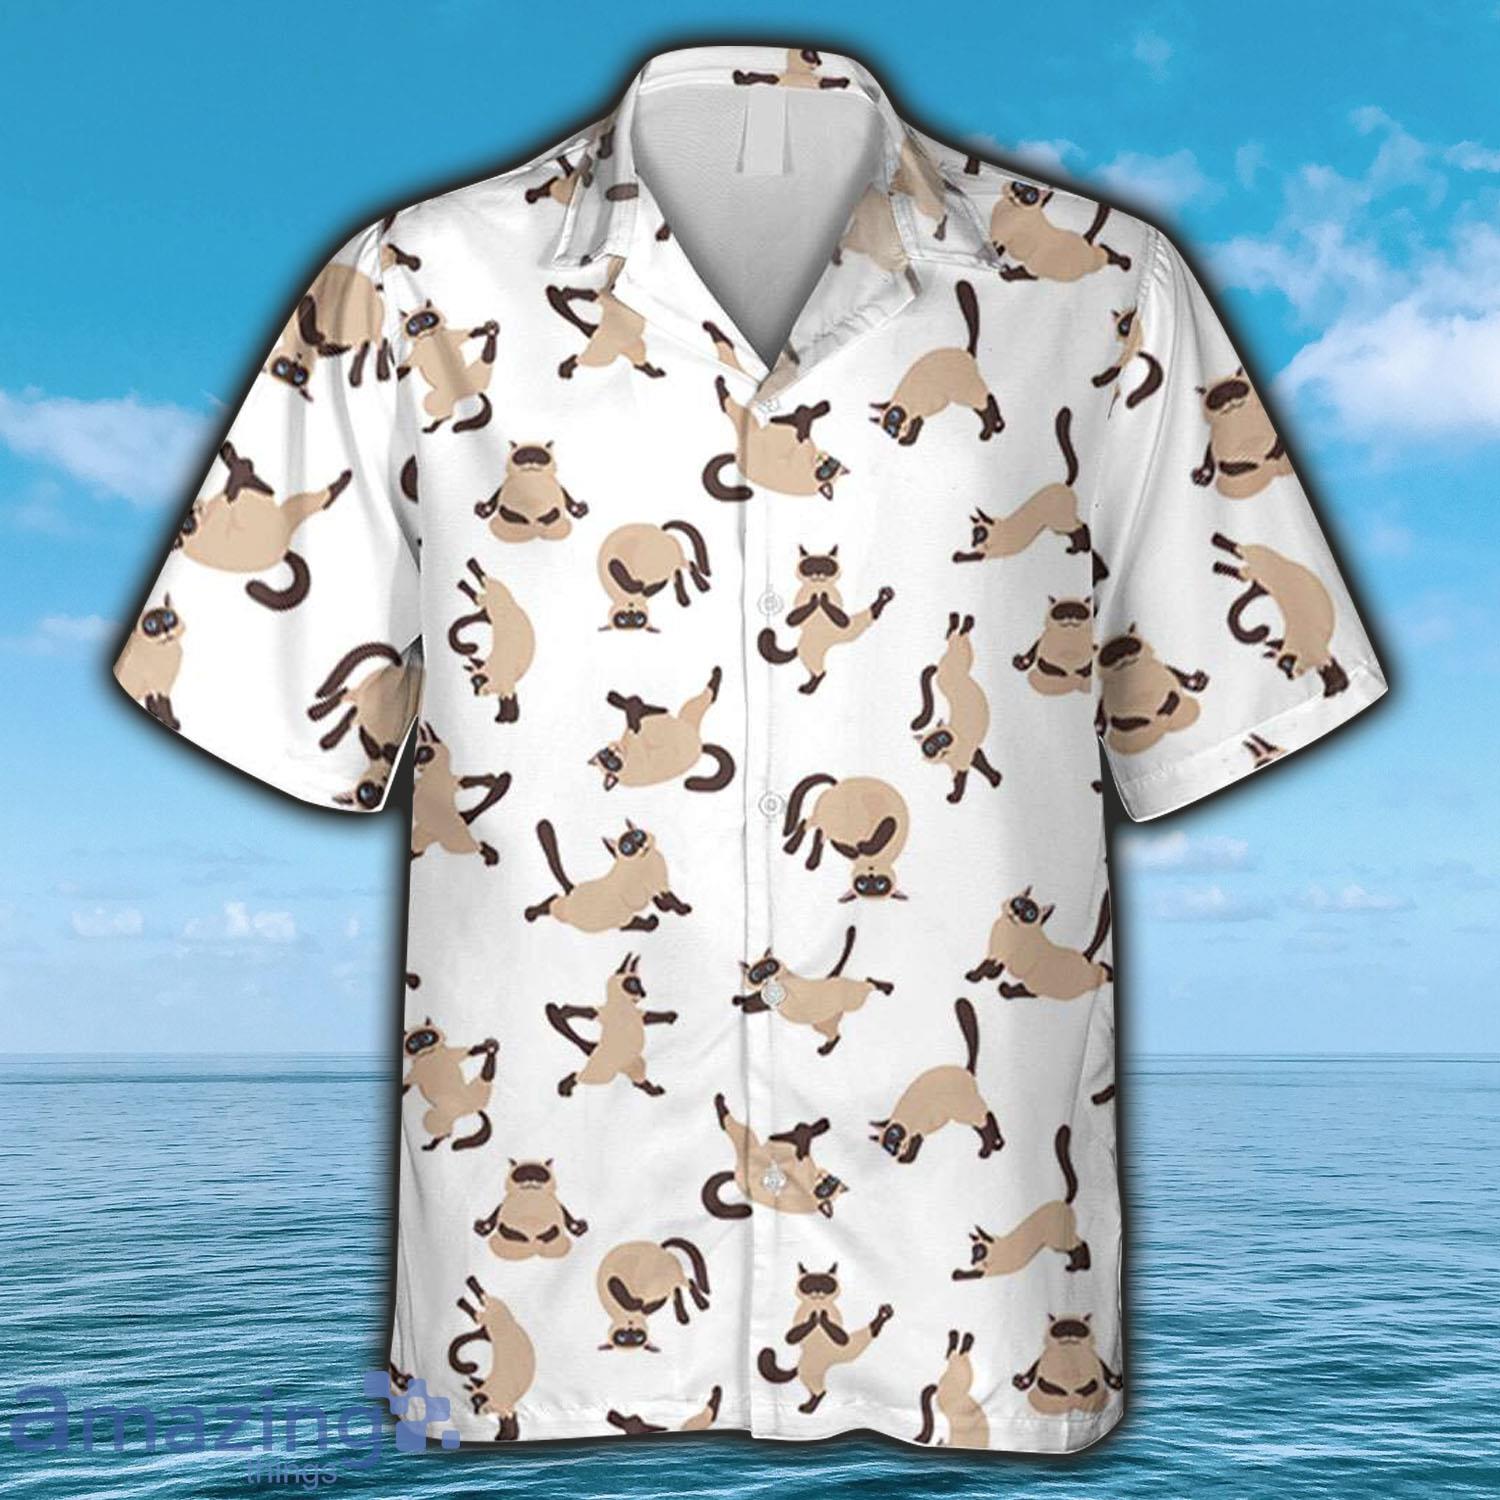 Siamese Cats Doodles Exercise, White Cat Hawaiian Shirt - Siamese Cats Doodles Exercise, White Cat Hawaiian Shirt